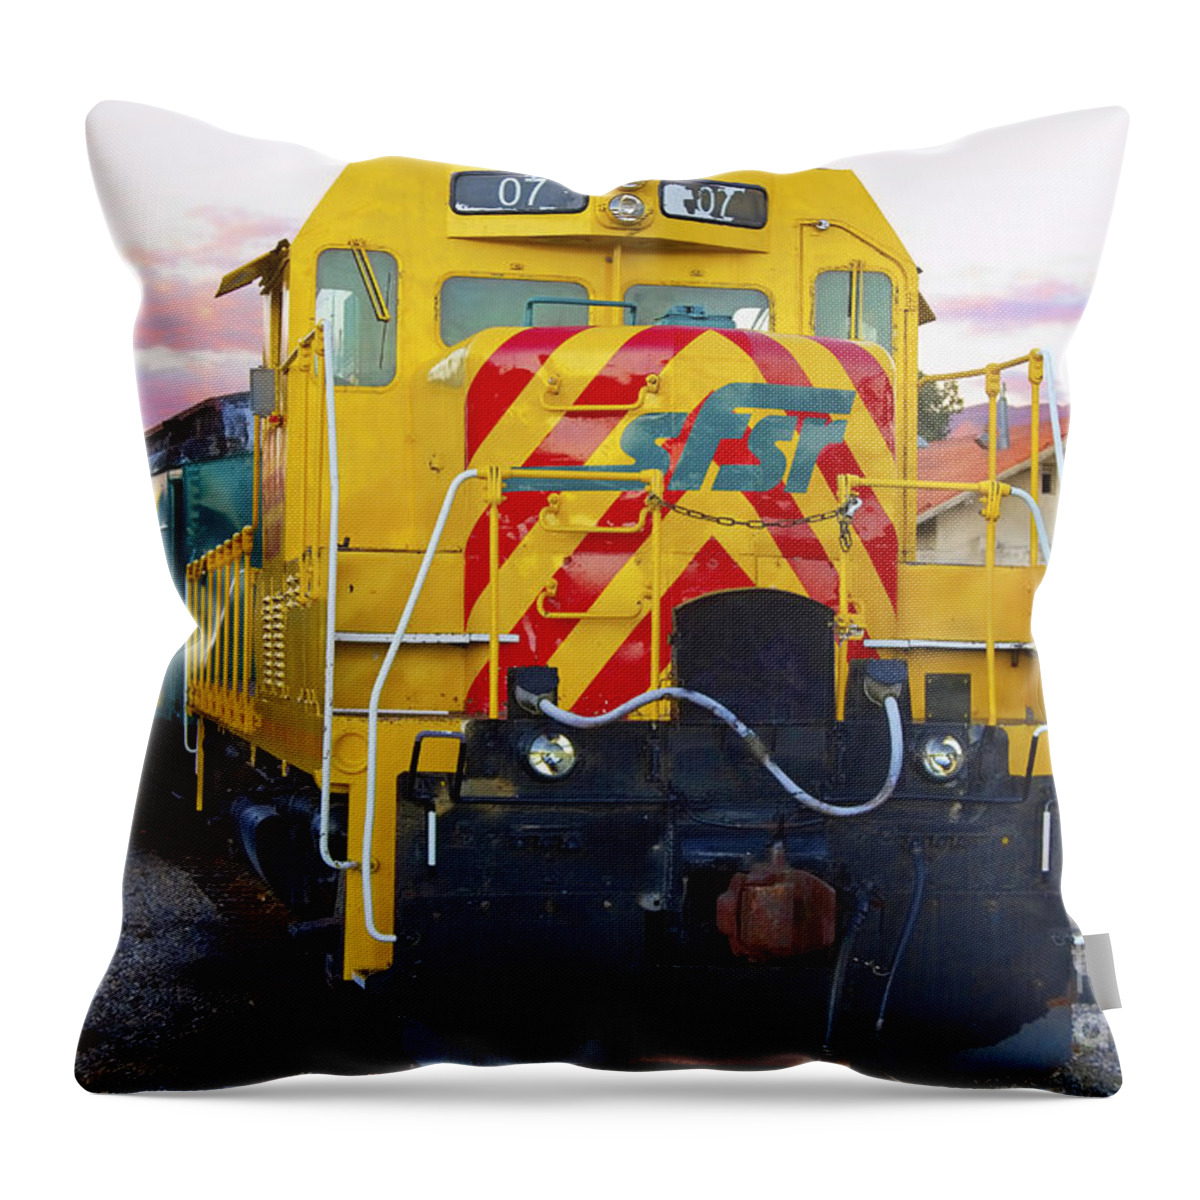 Double 07 Throw Pillow featuring the photograph Double 07 by Gary Holmes